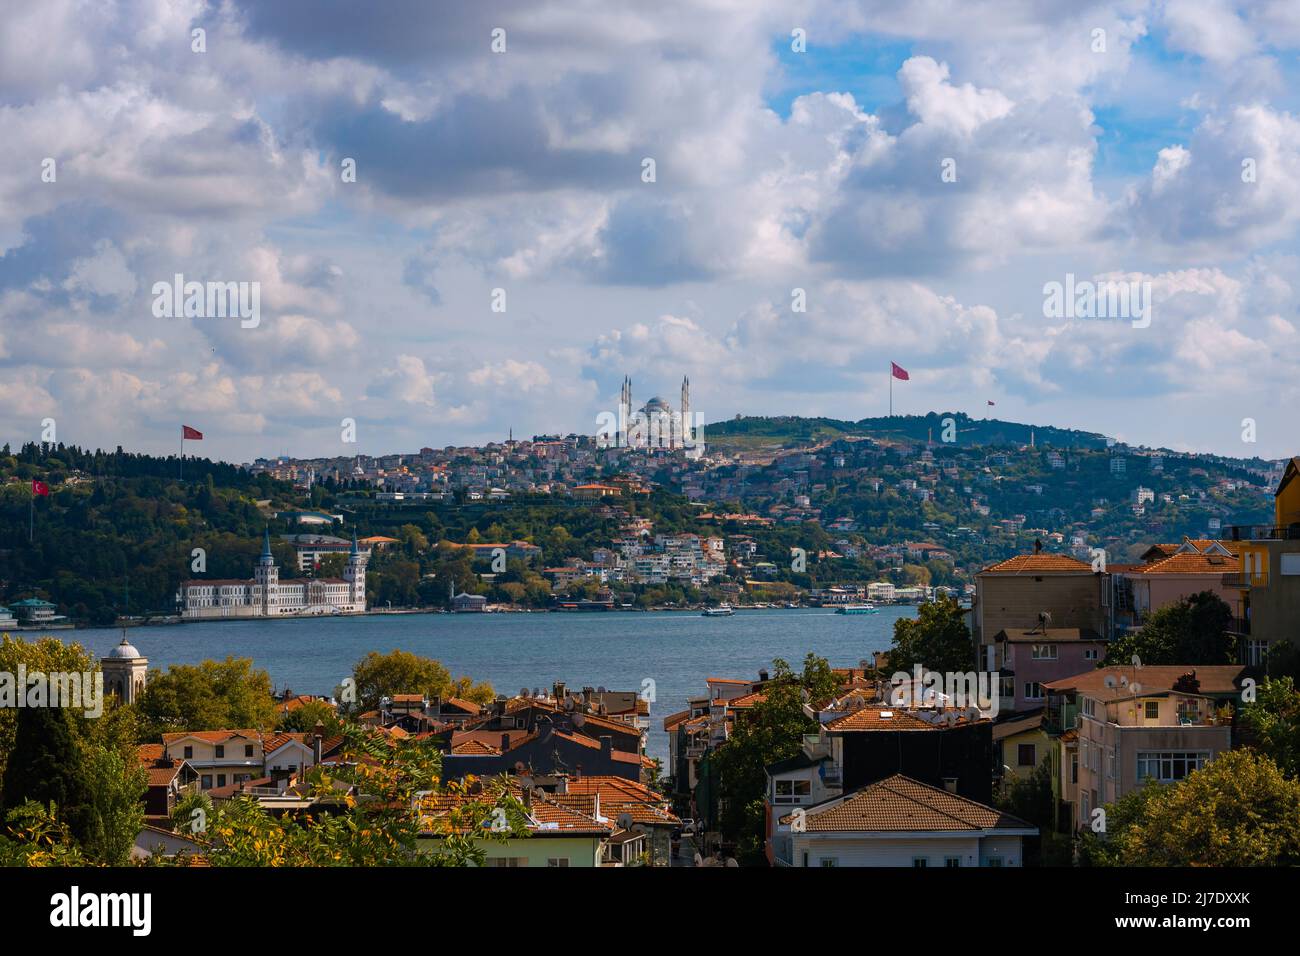 Istanbul view. Camlica Hills and Bosphorus view from Arnavutkoy district in Besiktas Istanbul. Stock Photo